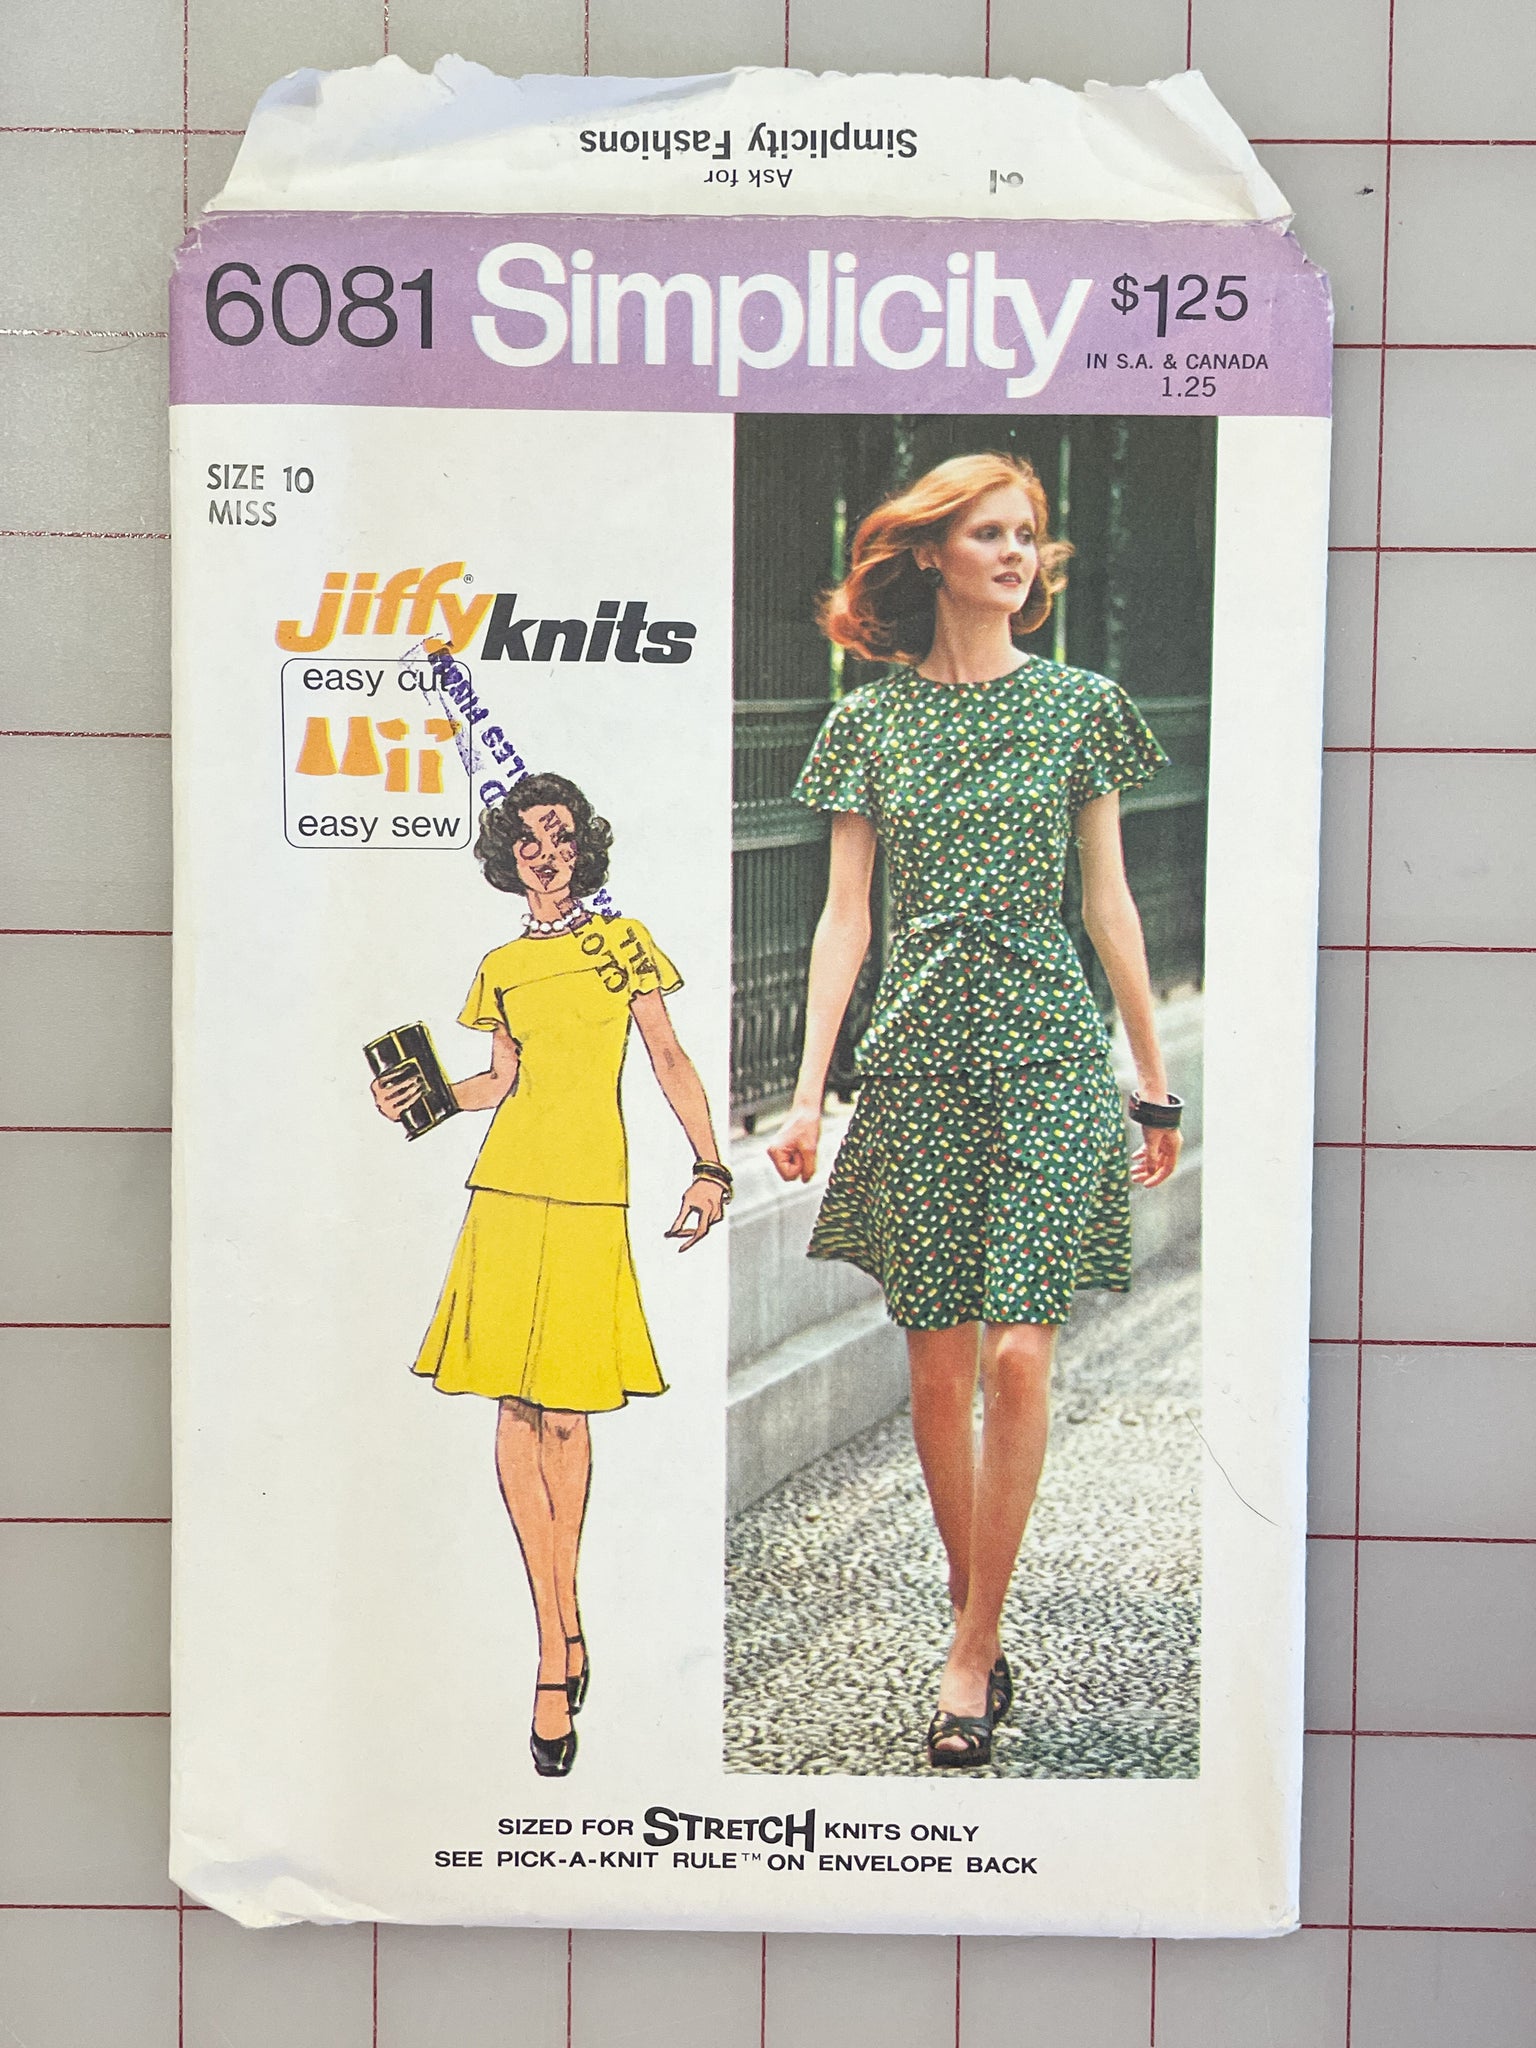 SALE 1973 Simplicity 6081 Pattern - Women's Top and Skirt FACTORY FOLDED